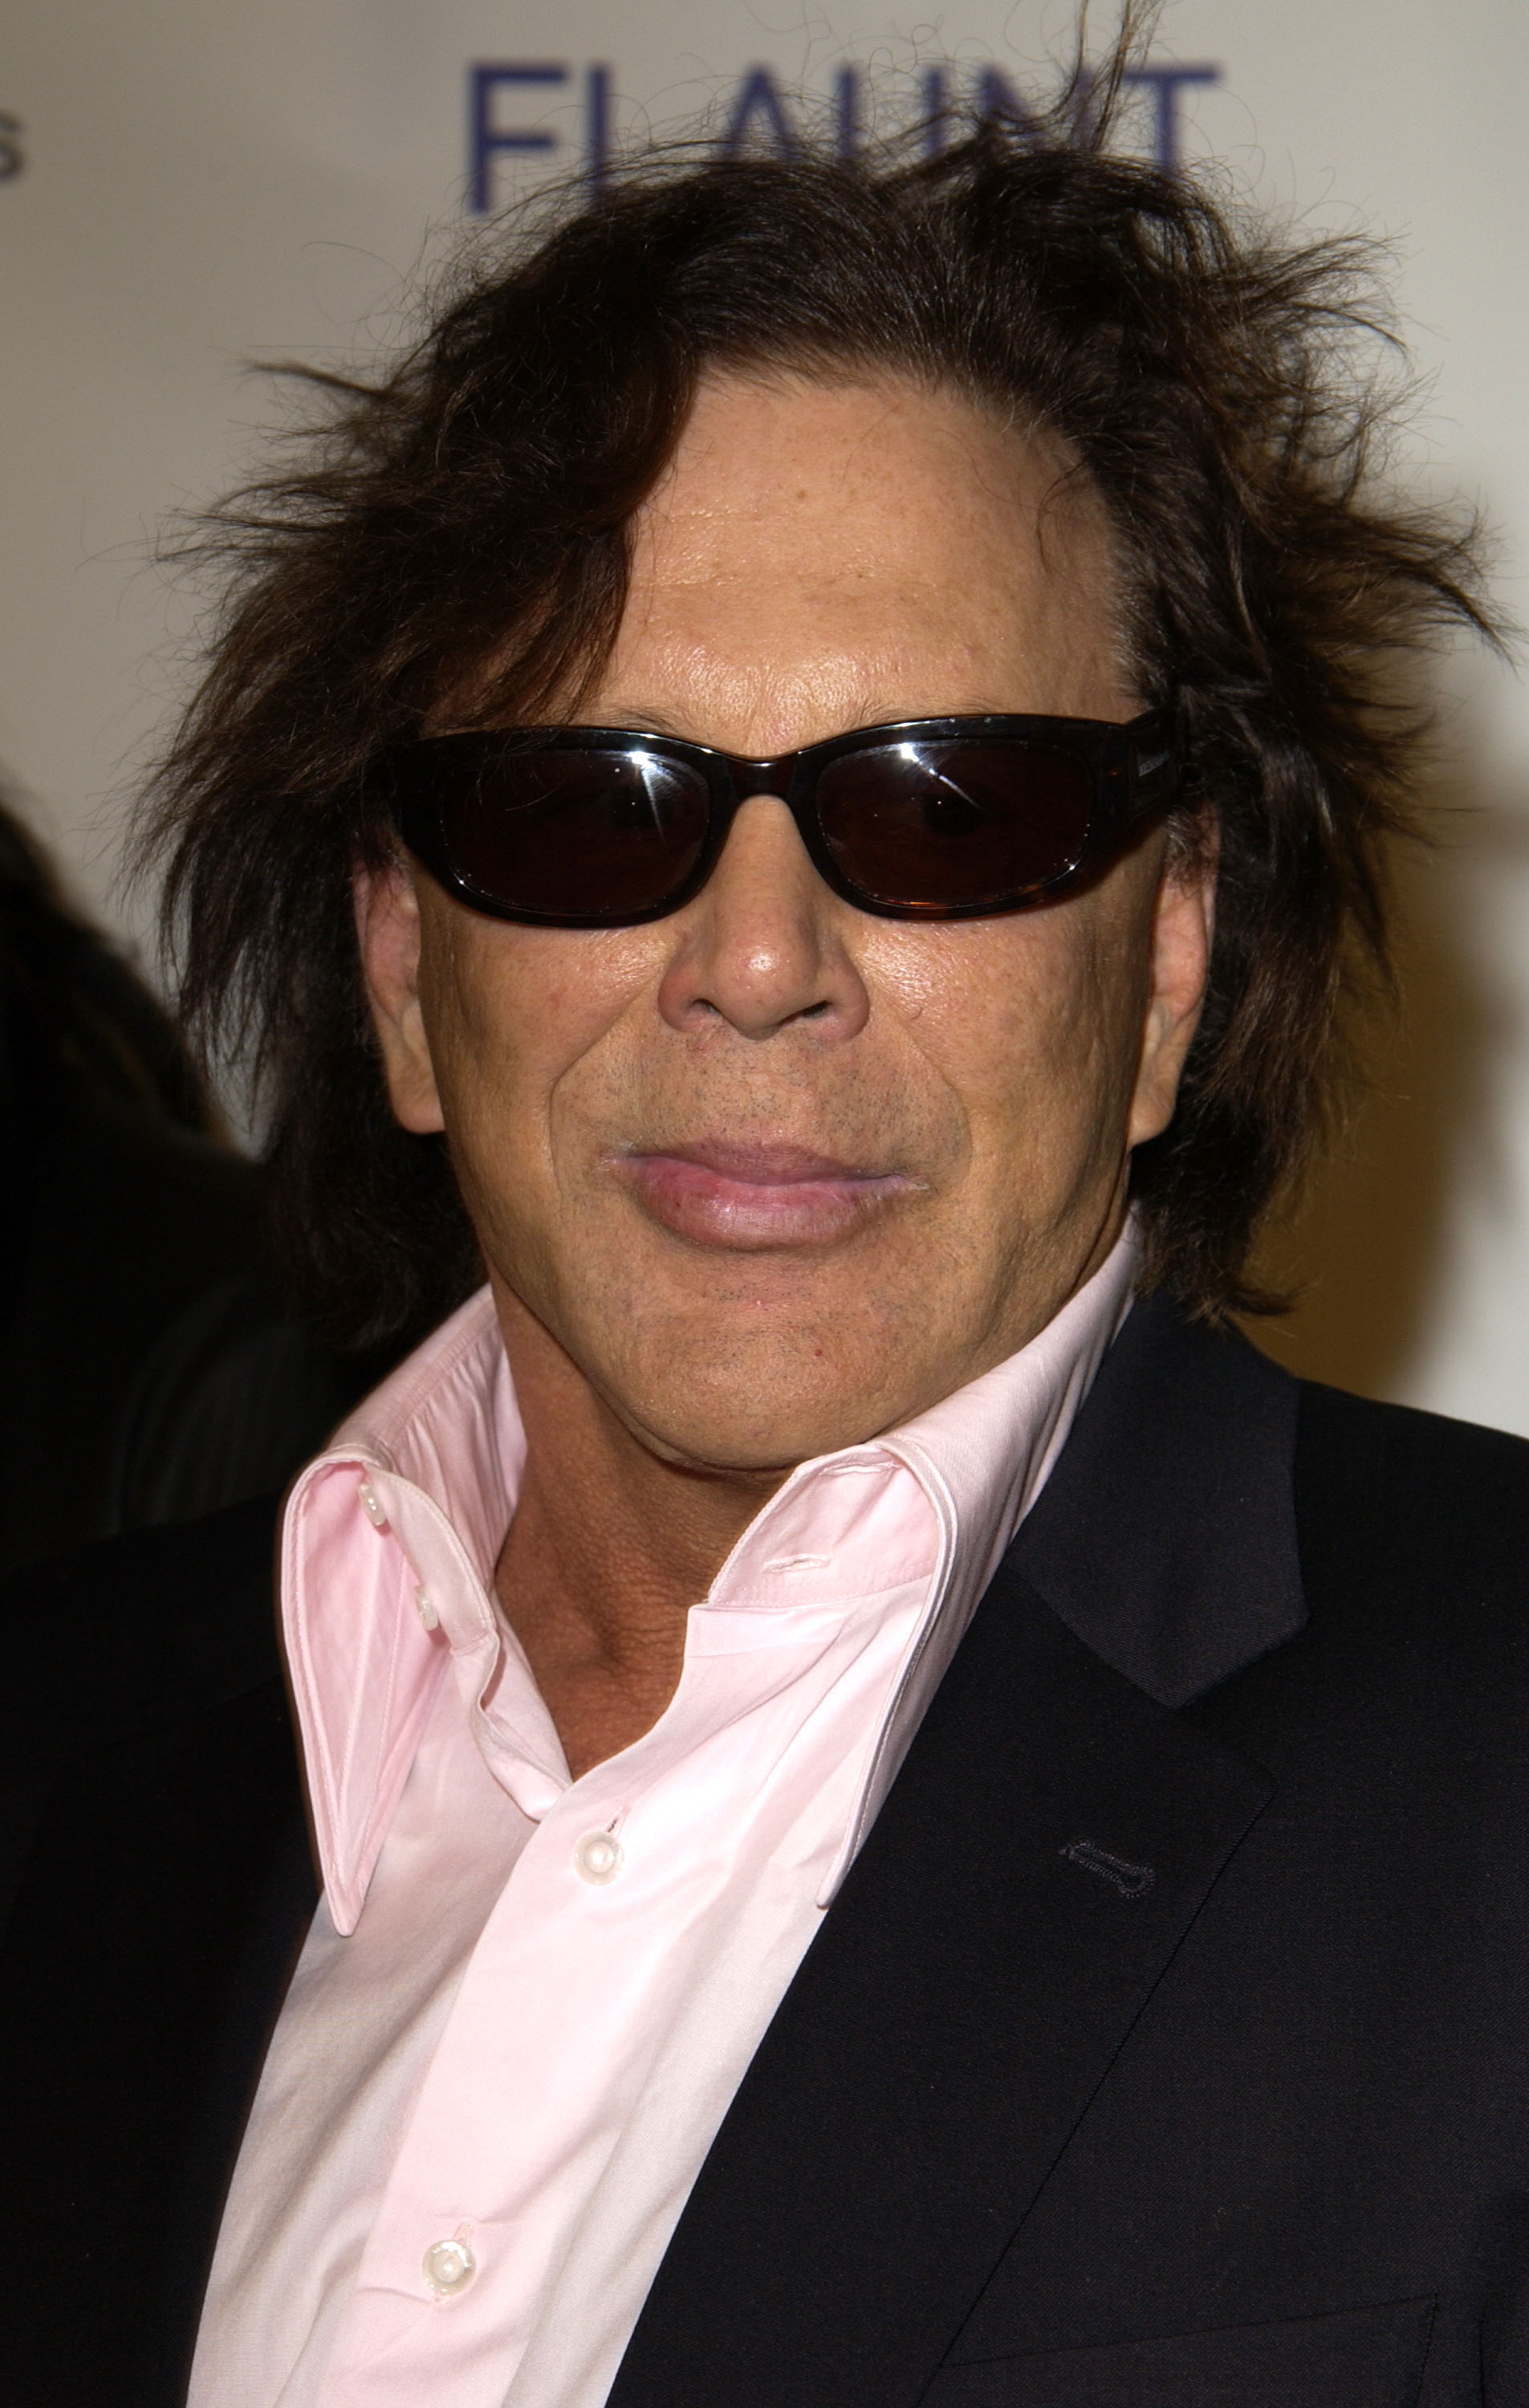 Mickey Rourke at the Los Angeles premiere of "Spun," 2003 | Source: Getty Images